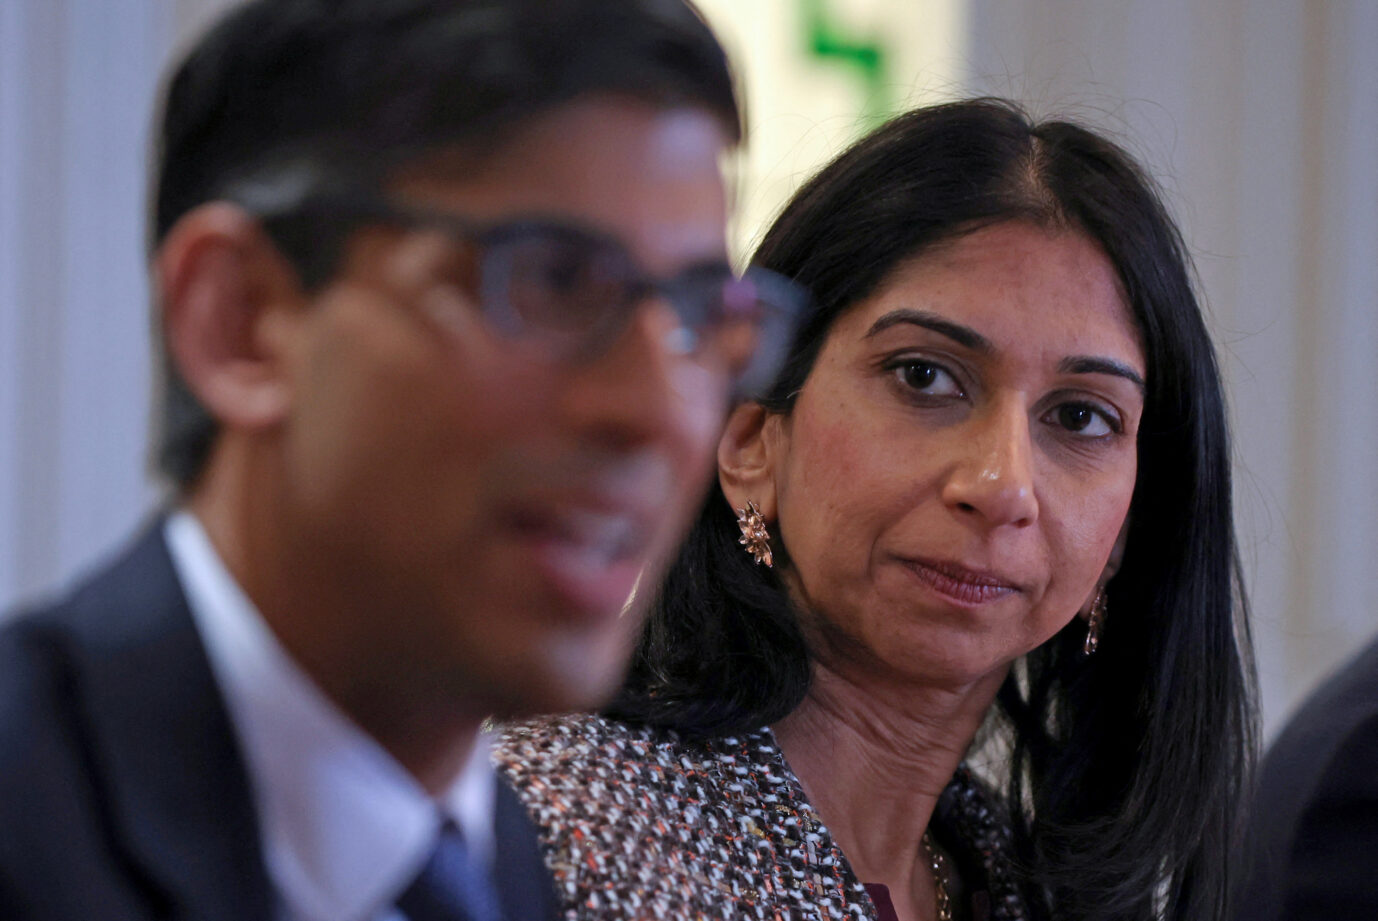 Suella Braverman sacked. File photo dated 03/04/23 of Prime Minister Rishi Sunak and (then) Home Secretary Suella Braverman during a visit to a hotel in Rochdale, Greater Manchester, for a meeting of the Grooming Gangs Taskforce. Issue date: Monday November 13, 2023. Suella Braverman has been sacked as home secretary, No 10 sources confirmed, saying Prime Minister Rishi Sunak asked her to leave the Government. See PA story POLITICS Reshuffle. Photo credit should read: Phil Noble/PA Wire URN:74557169